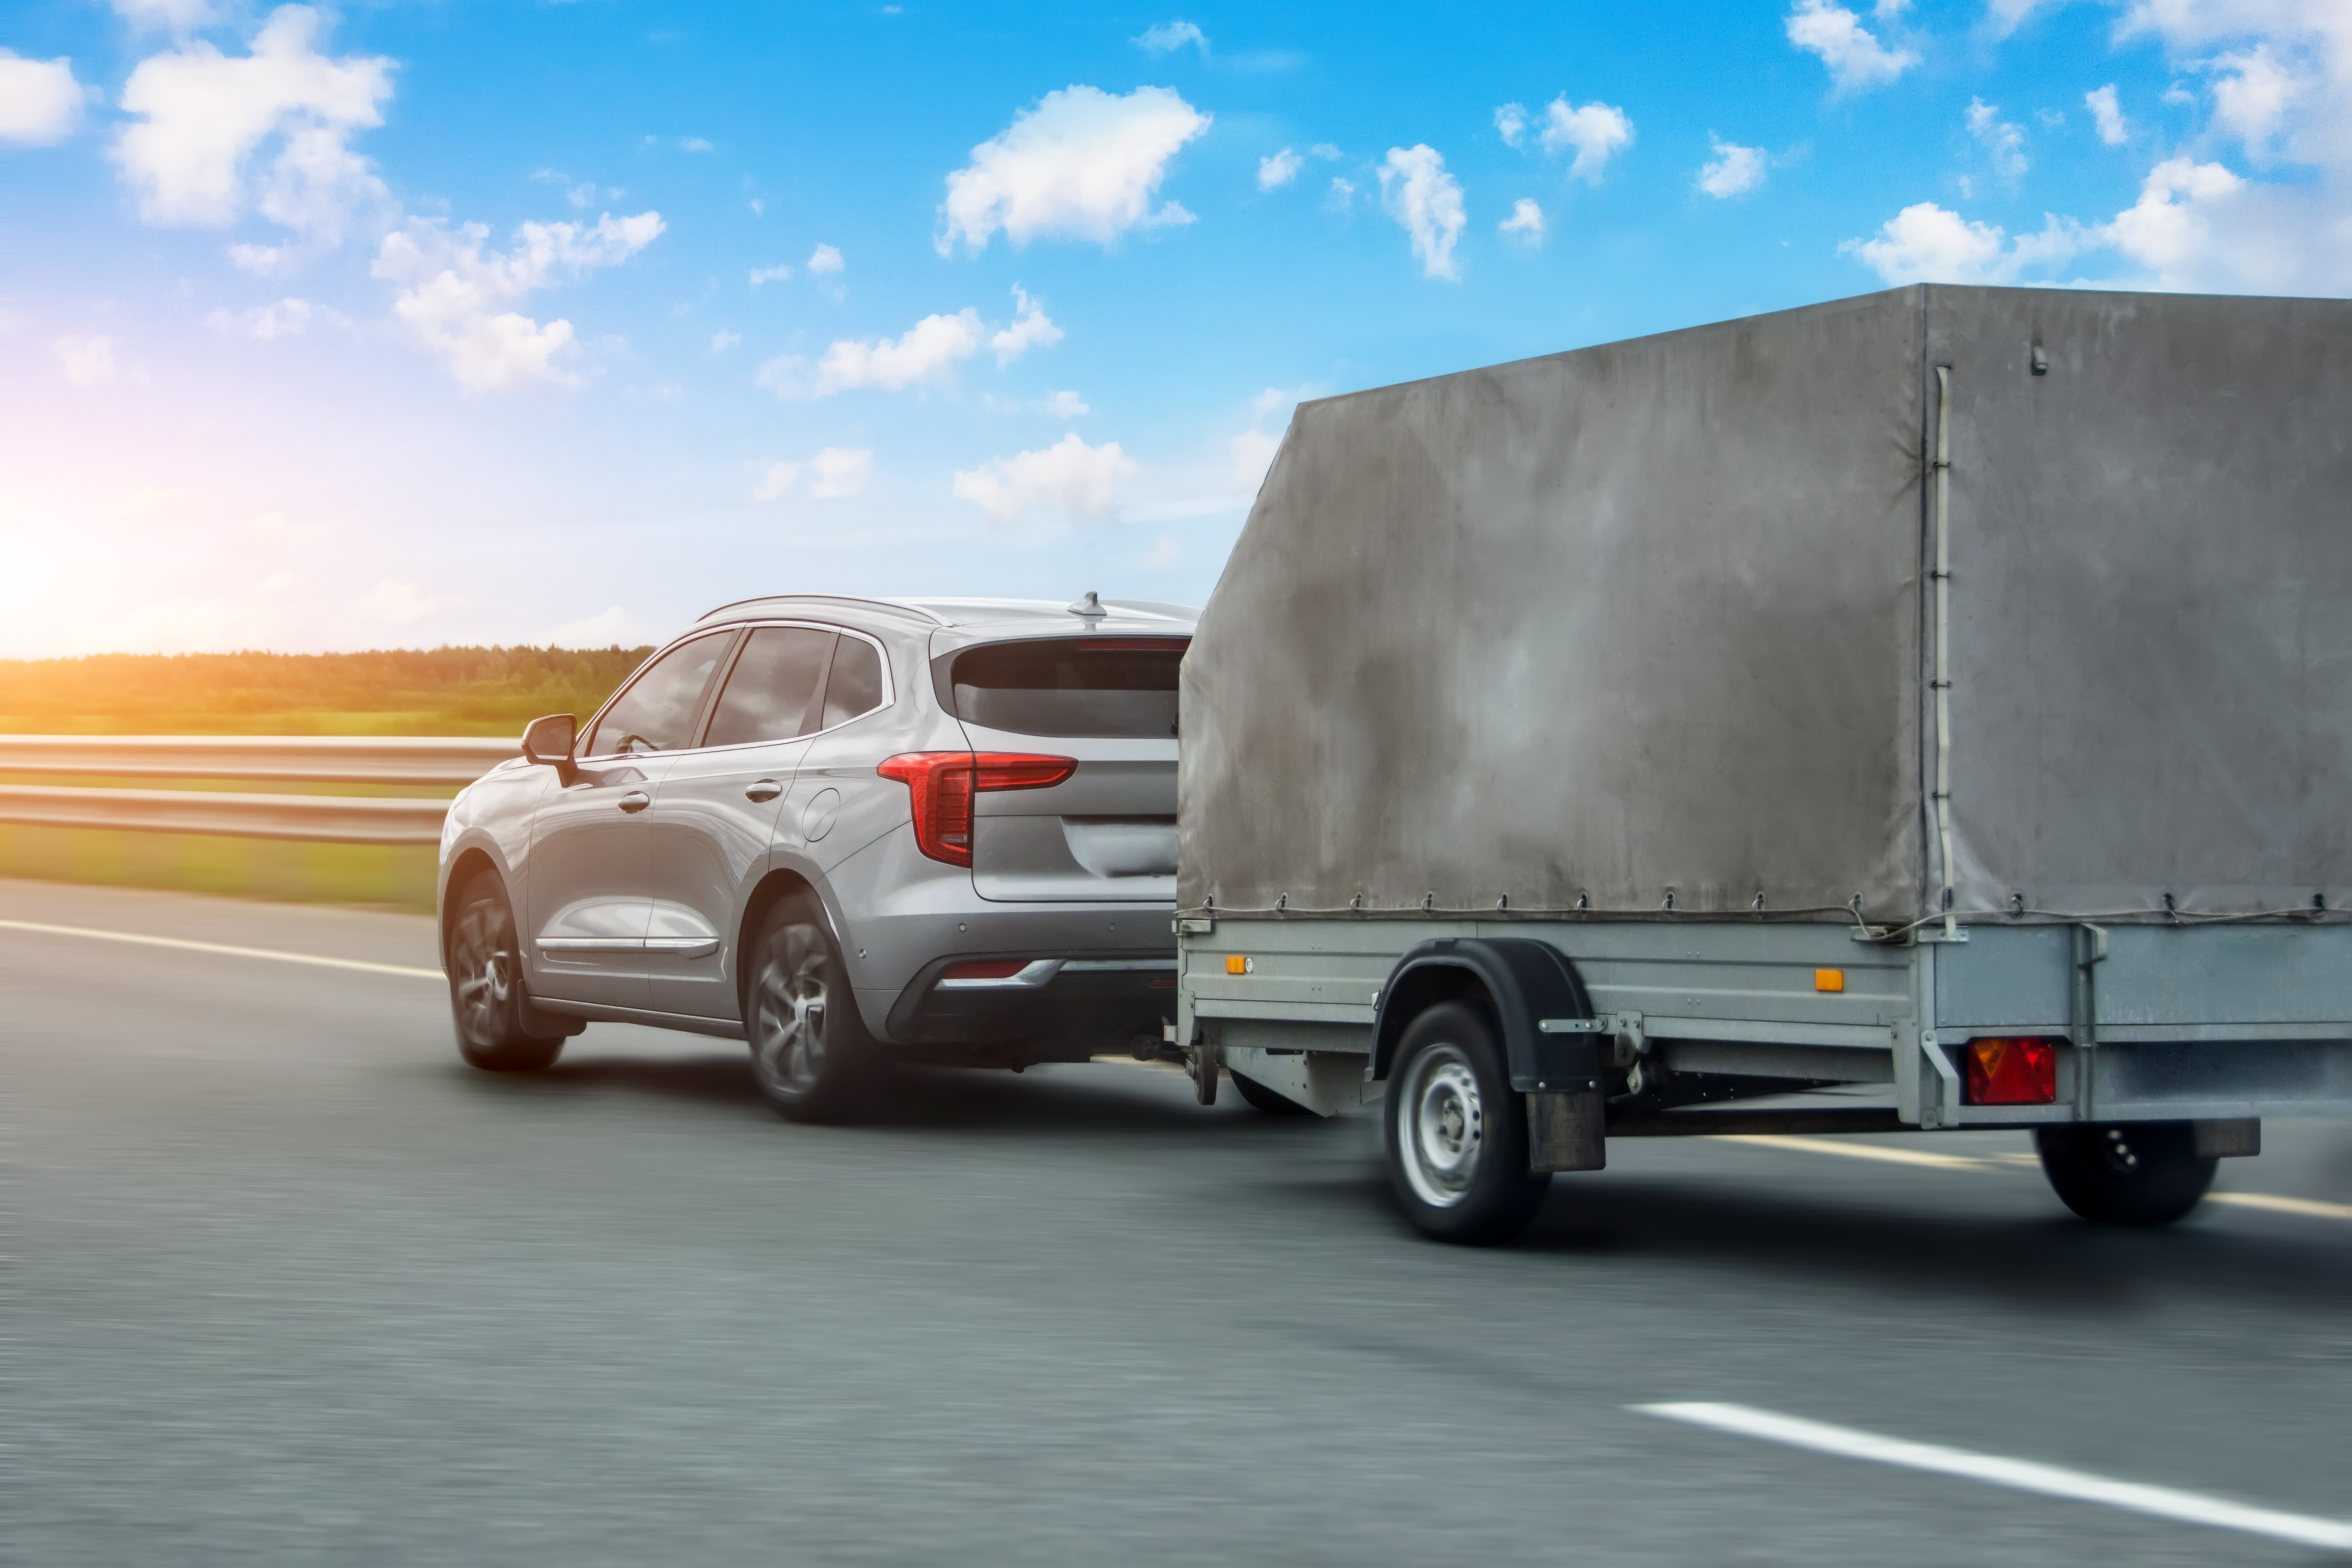 Does car insurance cover trailers?